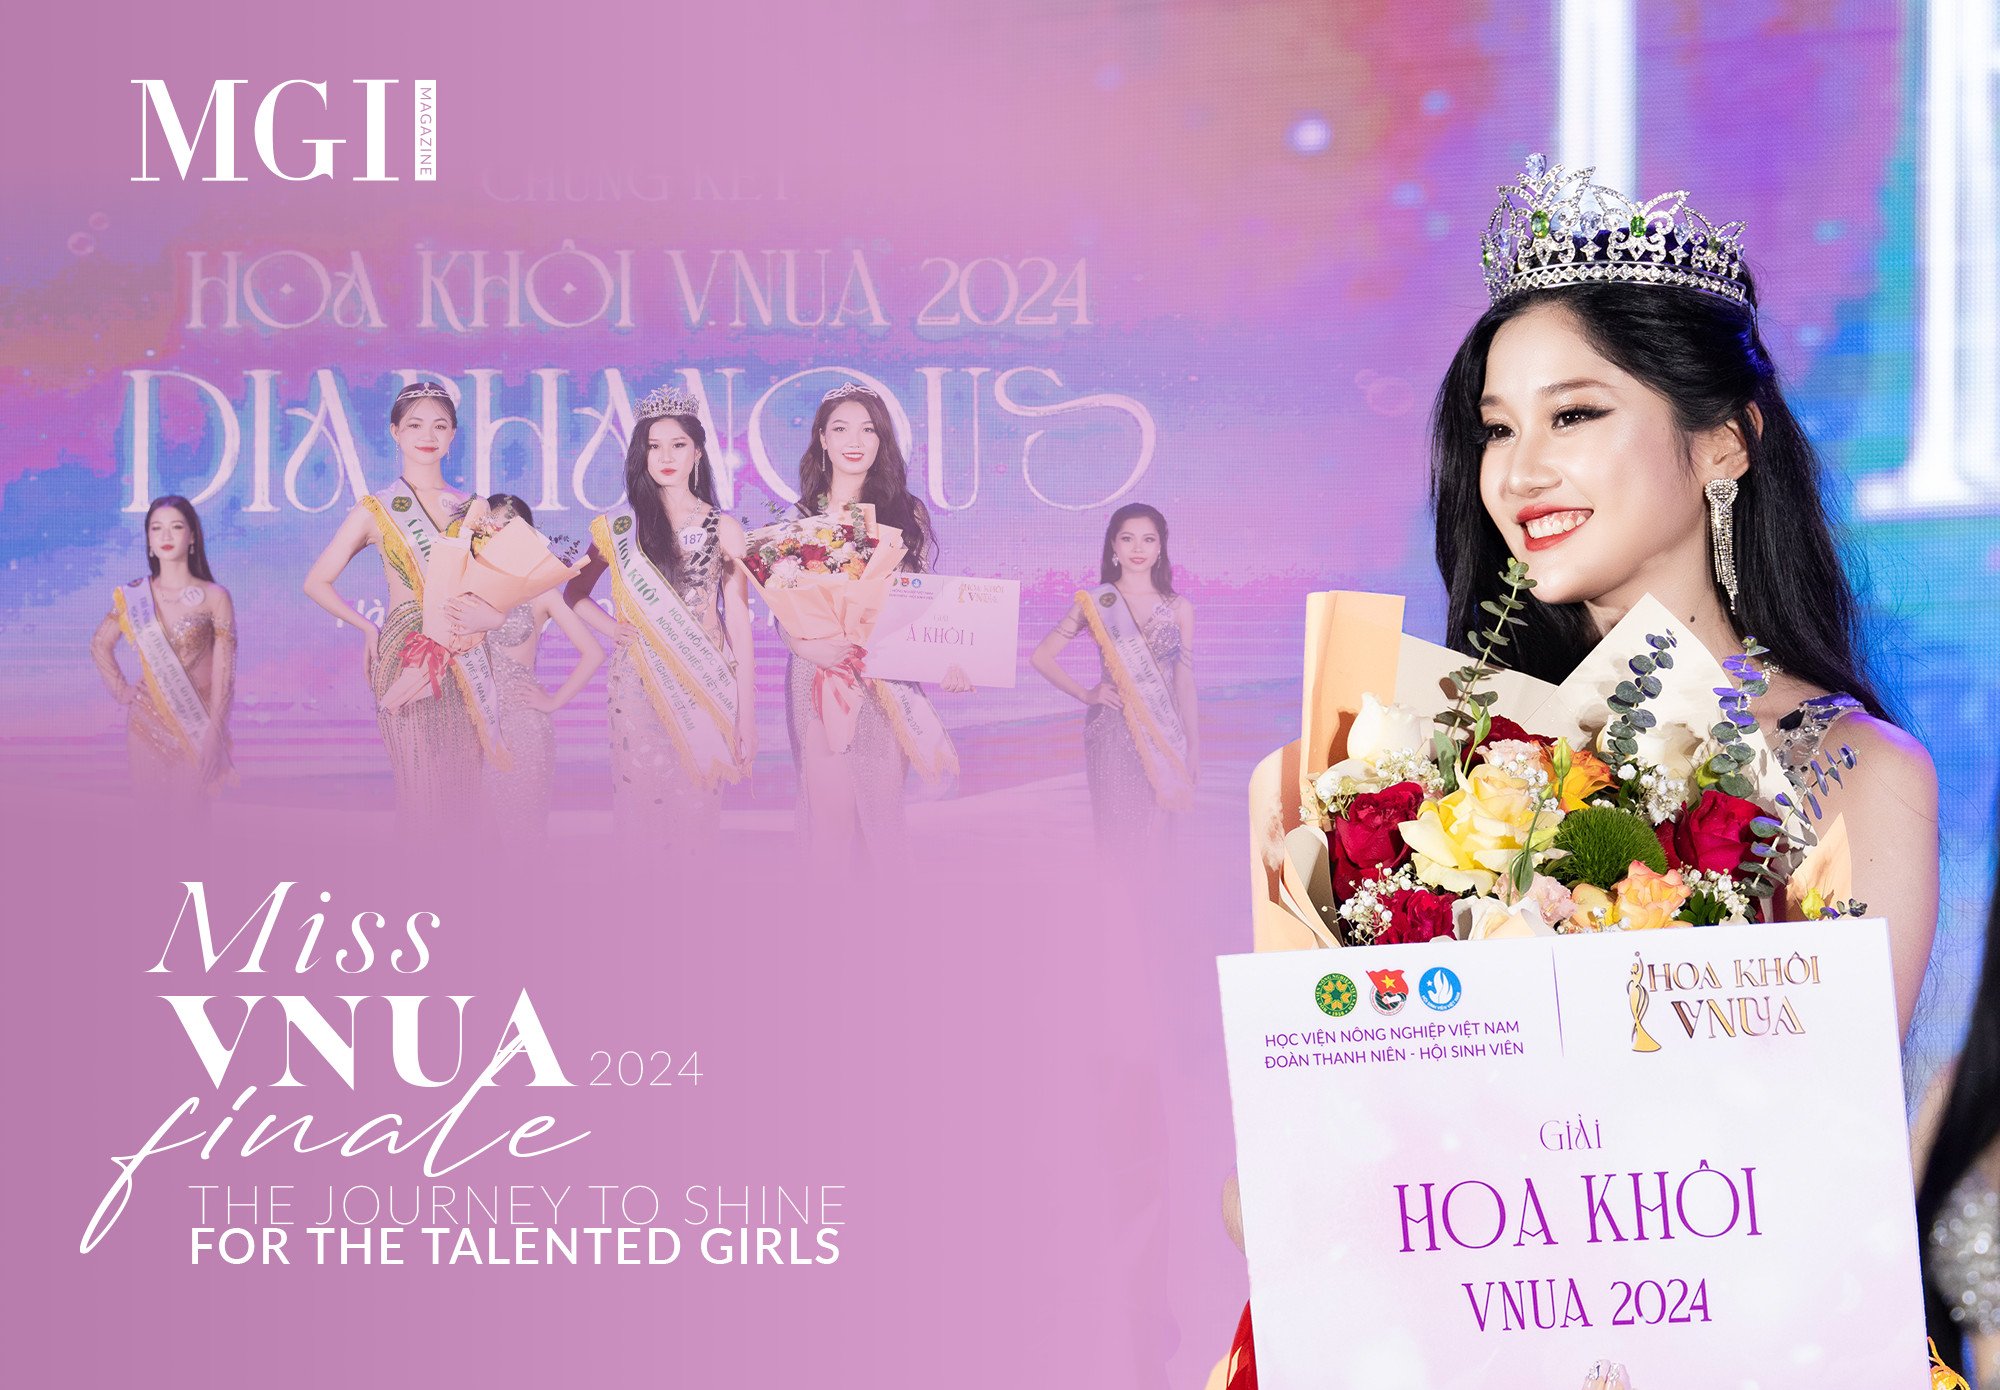 Miss VNUA 2024 finale: The journey to shine for the talented girls